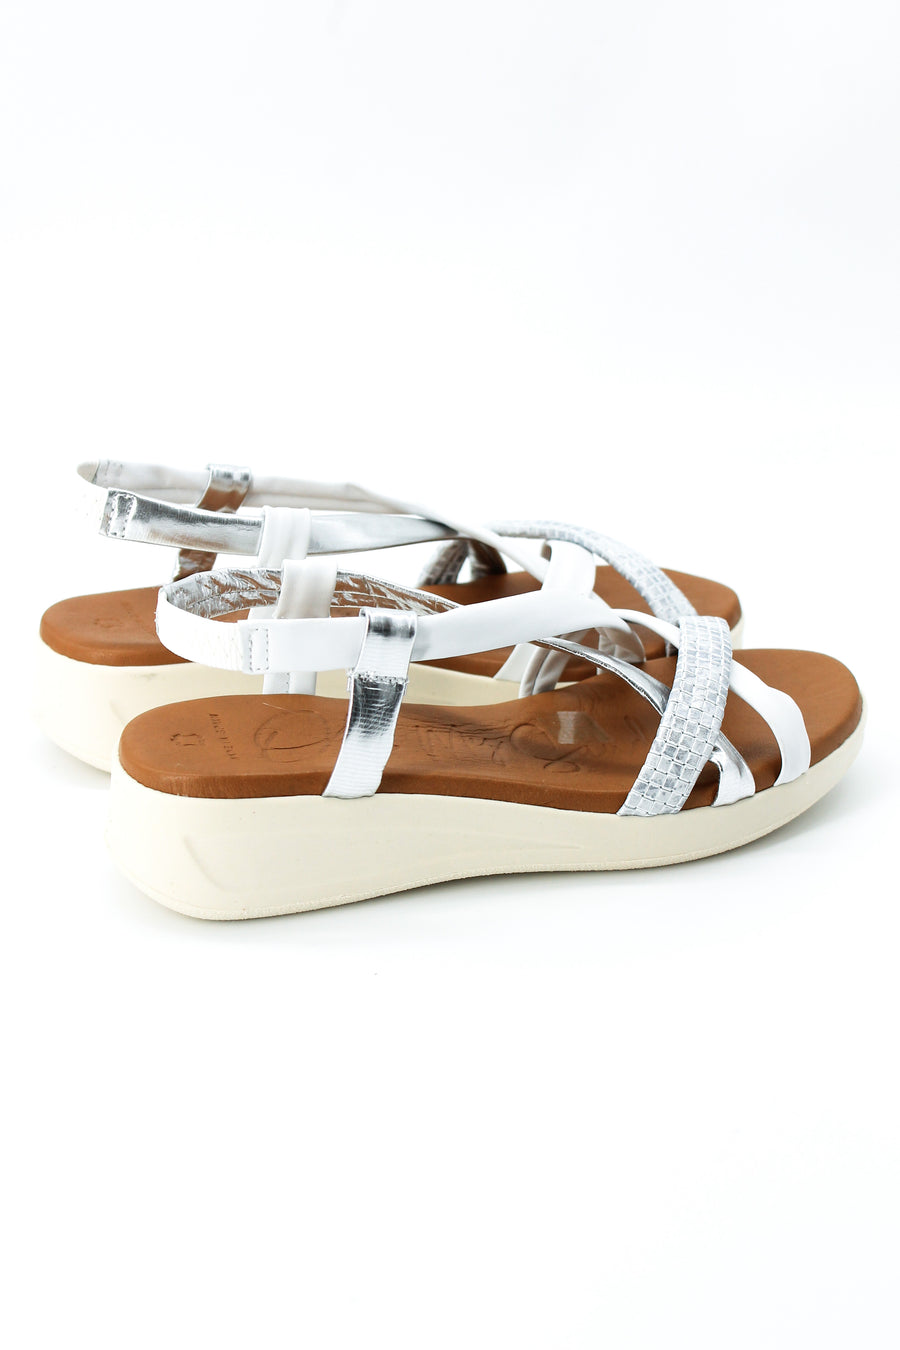 Oh My Sandals 5181 White and Silver